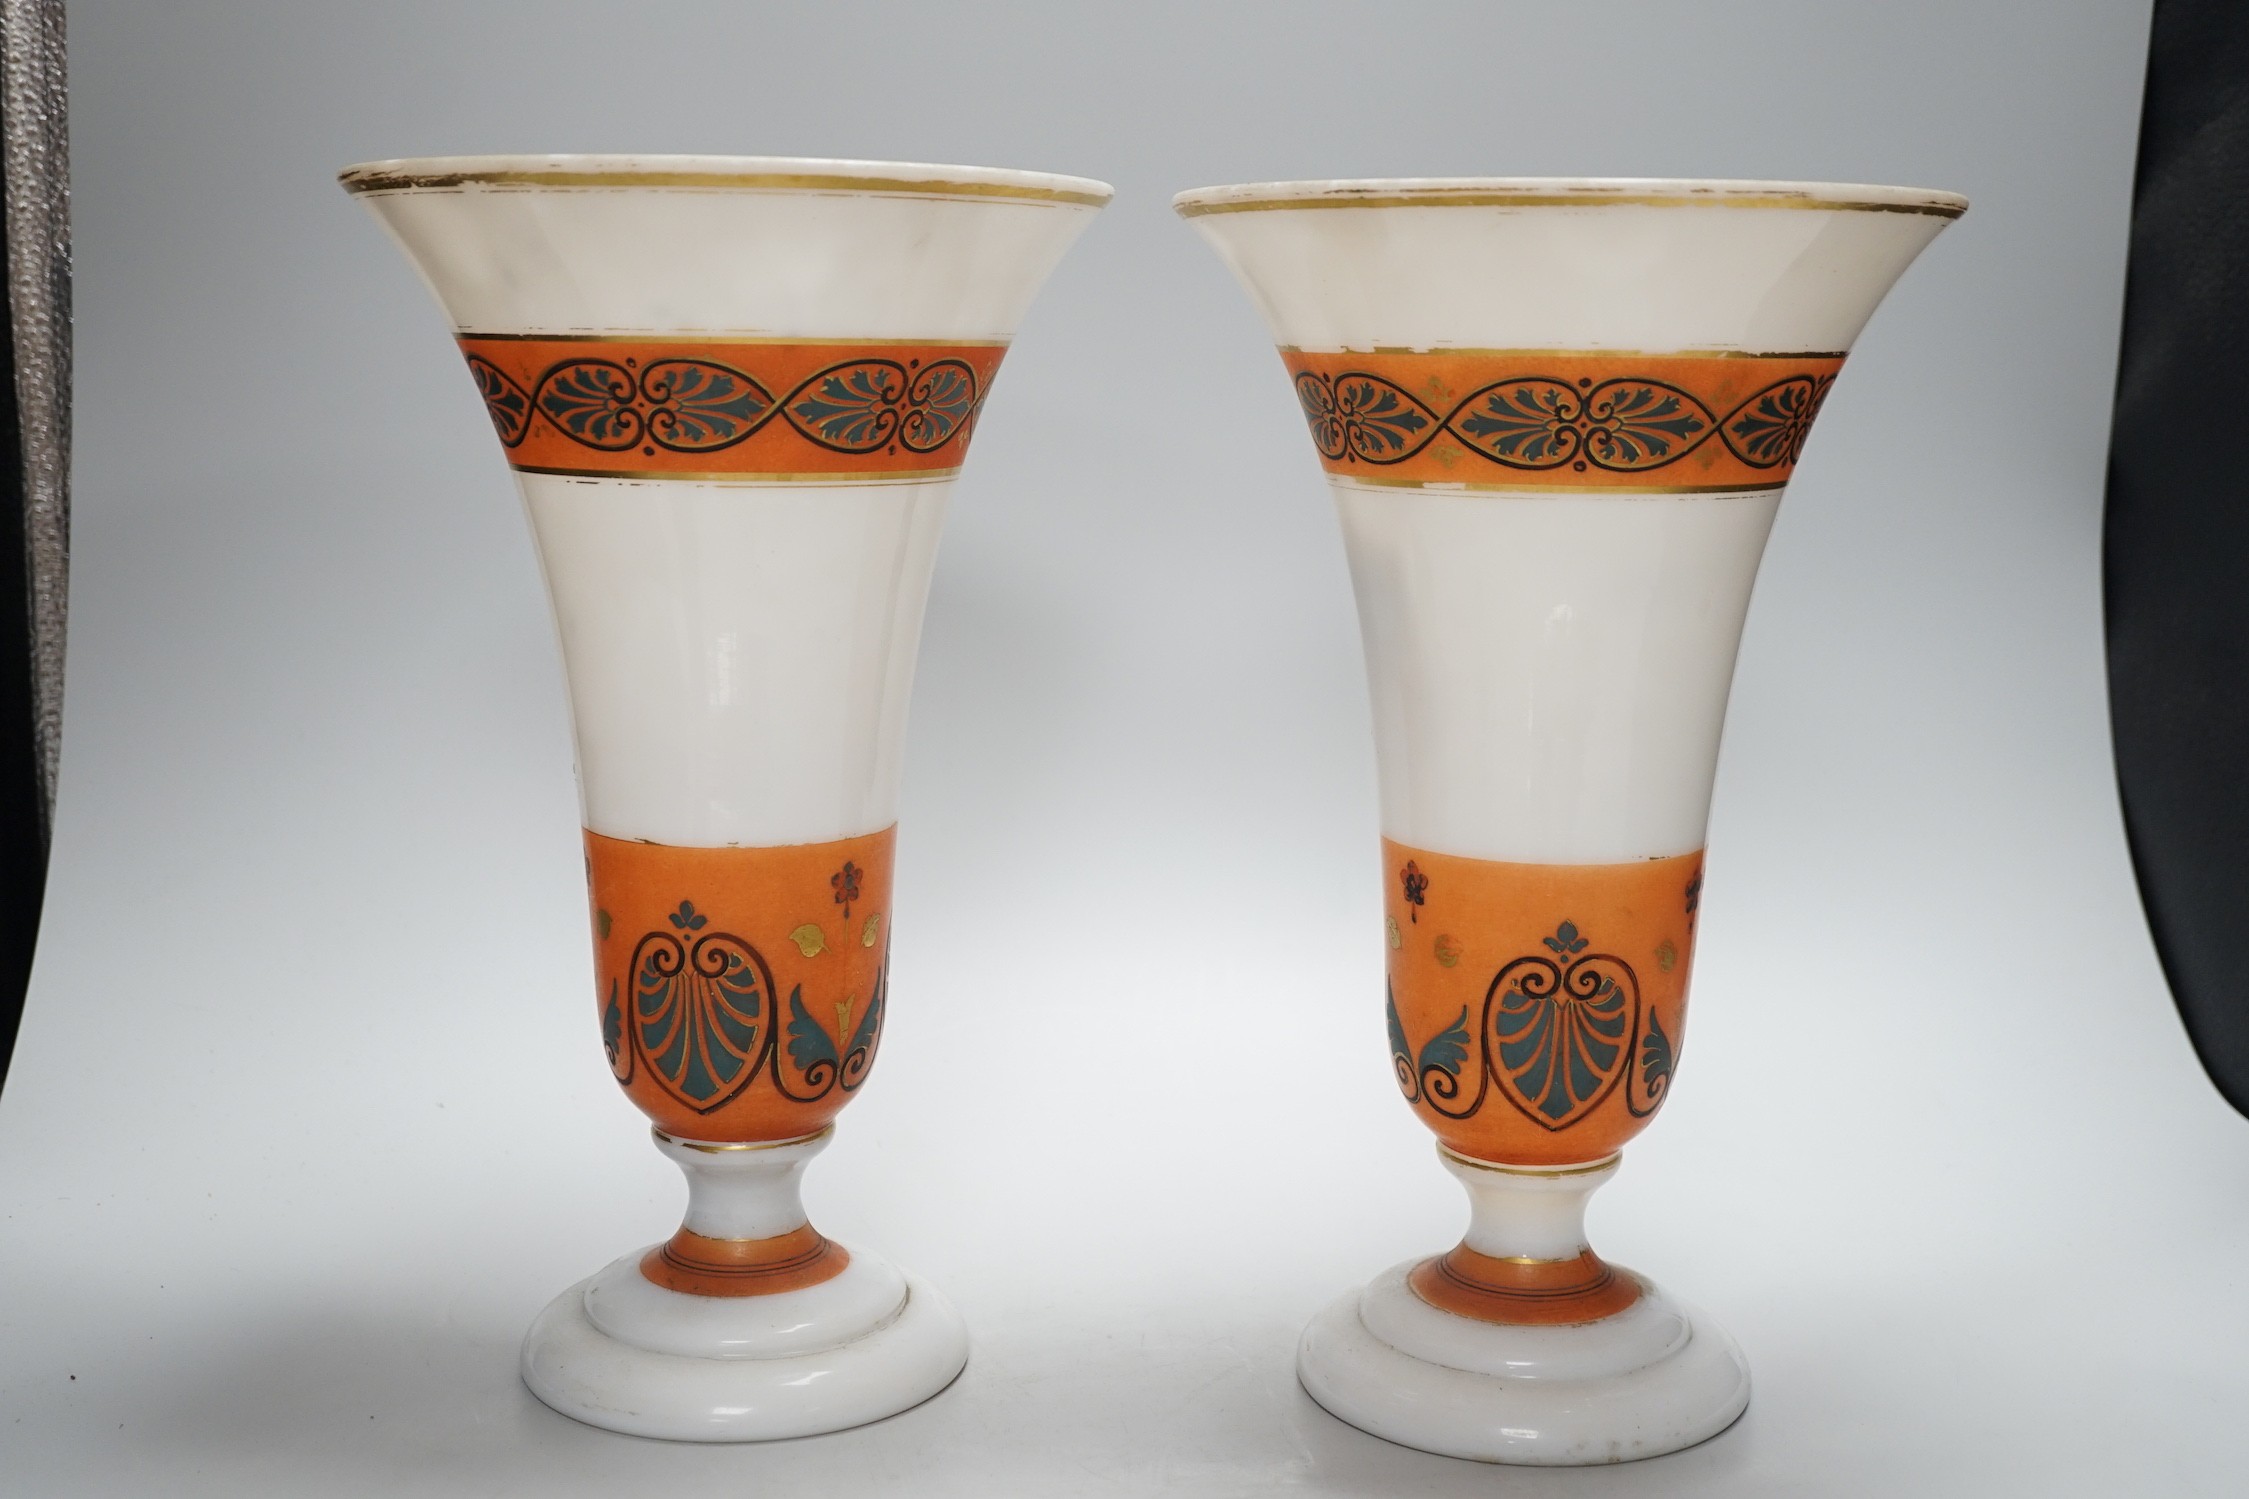 A pair of late 19th century French opaque glass ‘palmette’ vases, with orange decorative bands, - Image 2 of 3